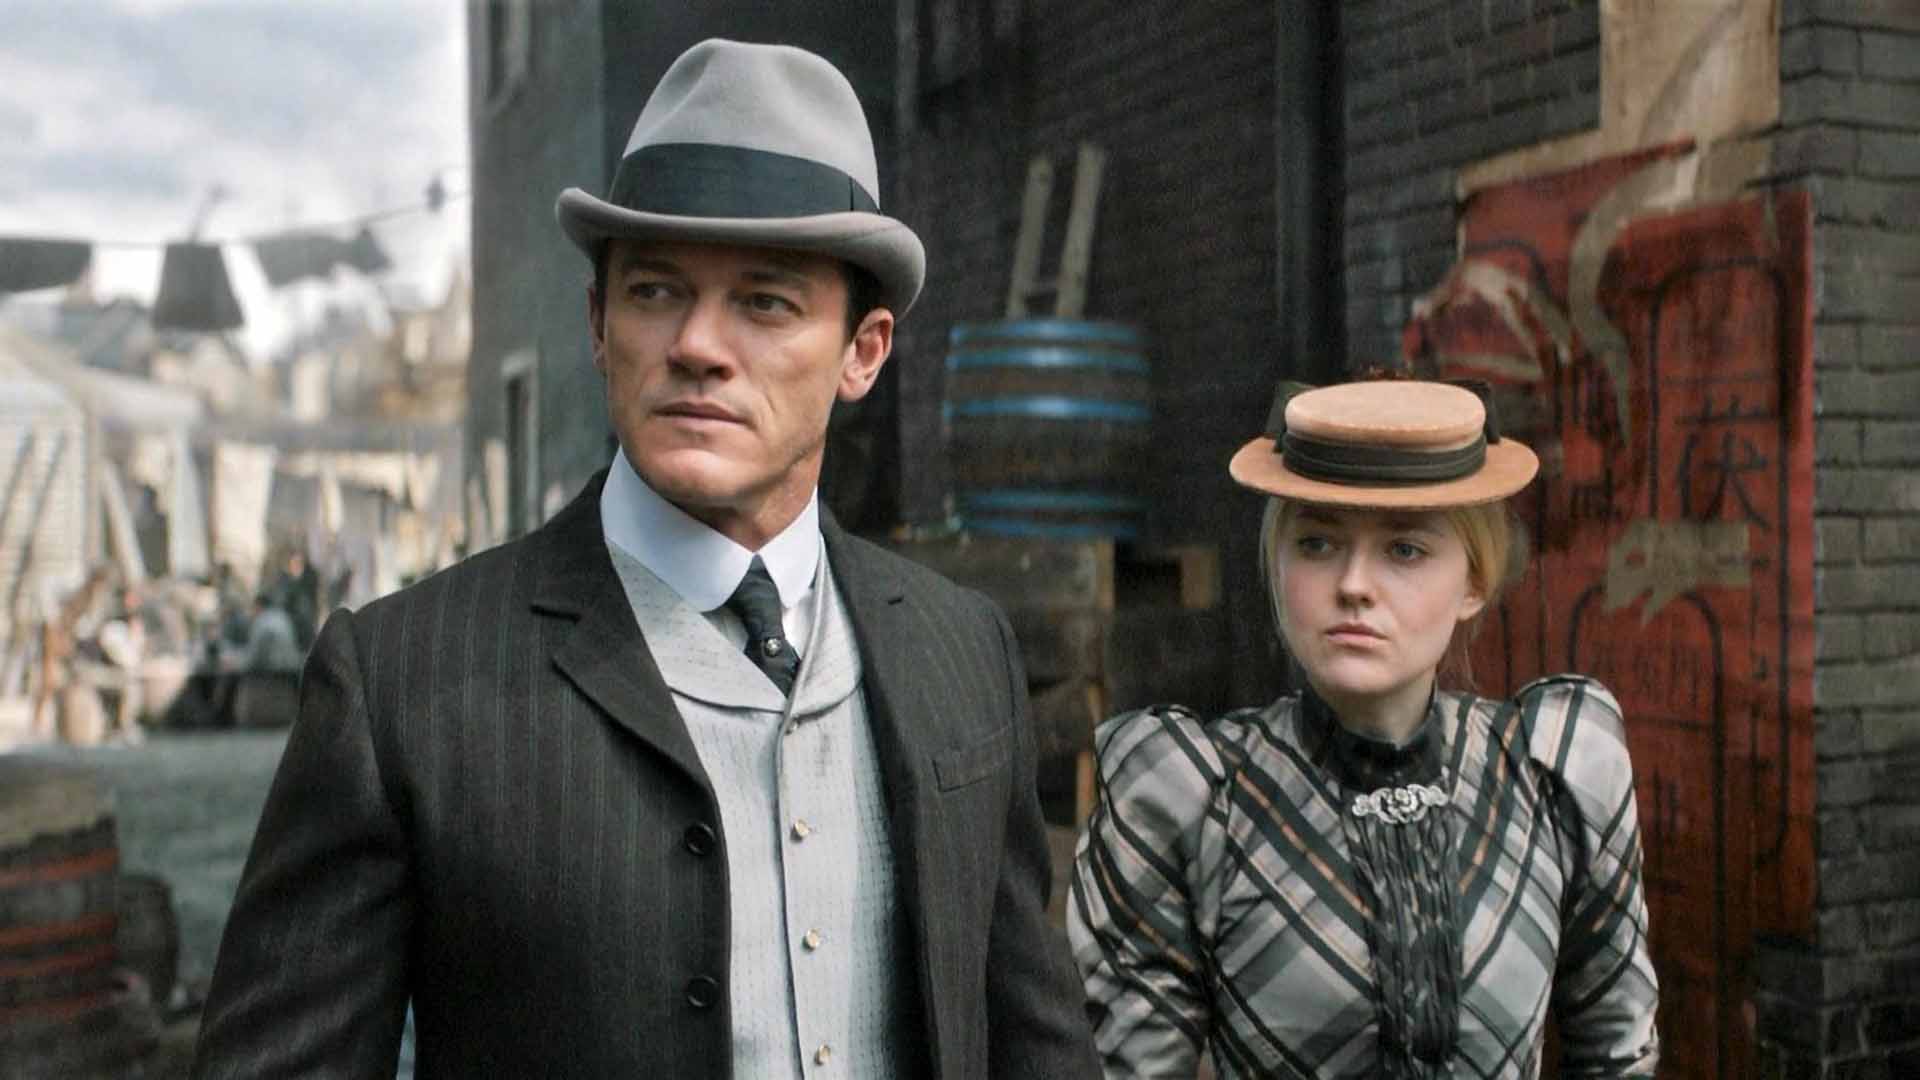 7 Shows Like Peaky Blinders That Will Make You Appreciate Cillian Murphy's Series Even More